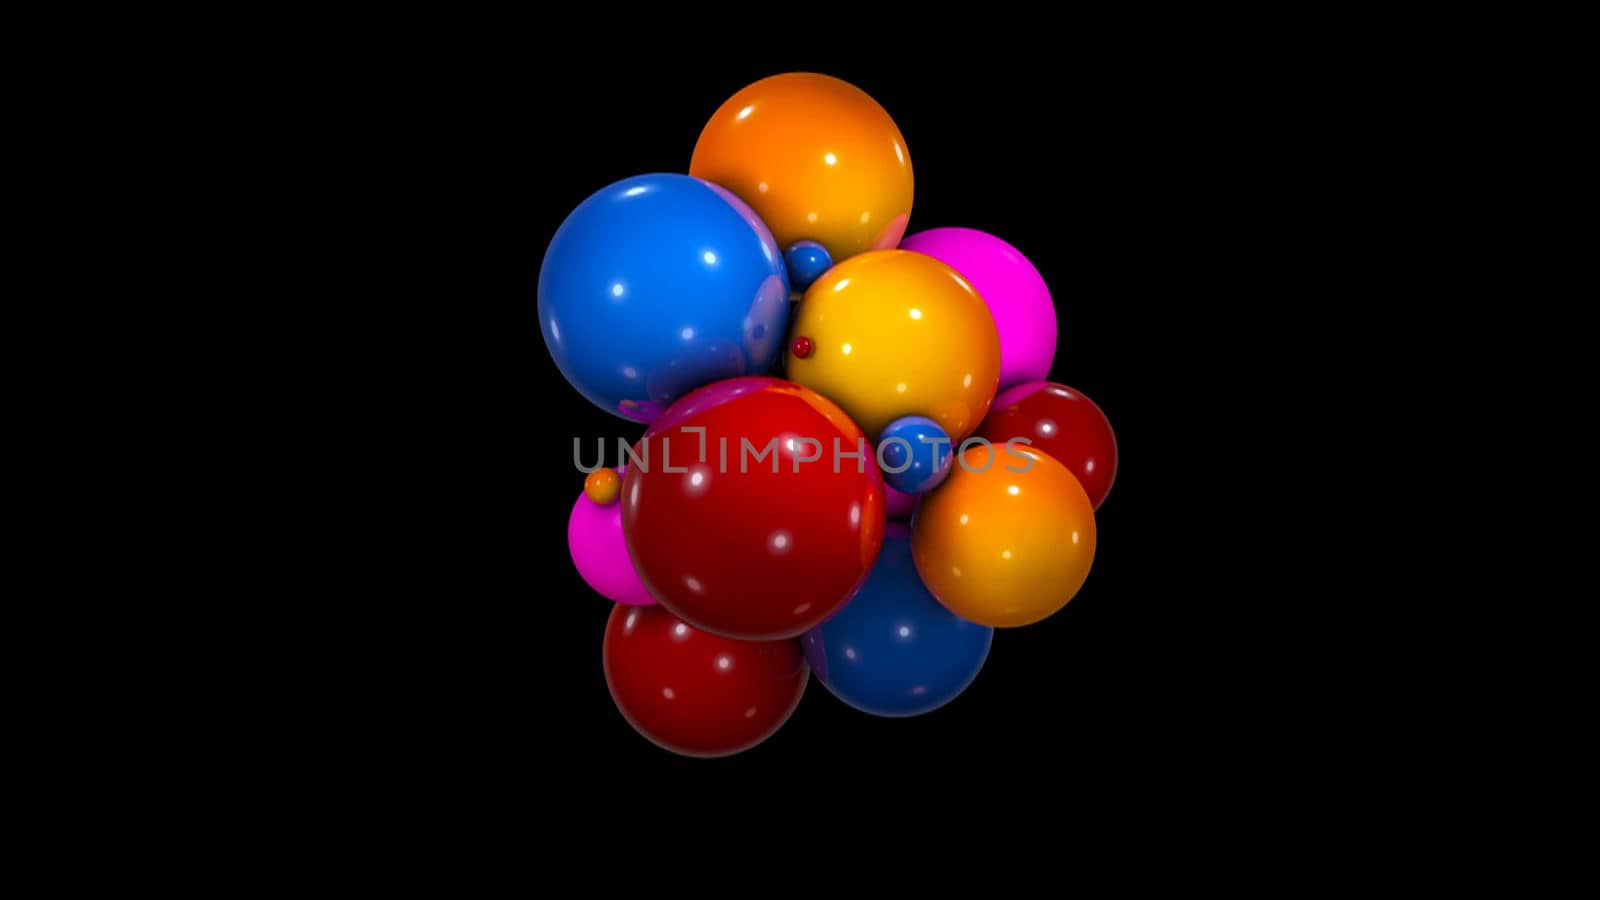 Abstract background with chaotic colorful spheres. 3d rendering